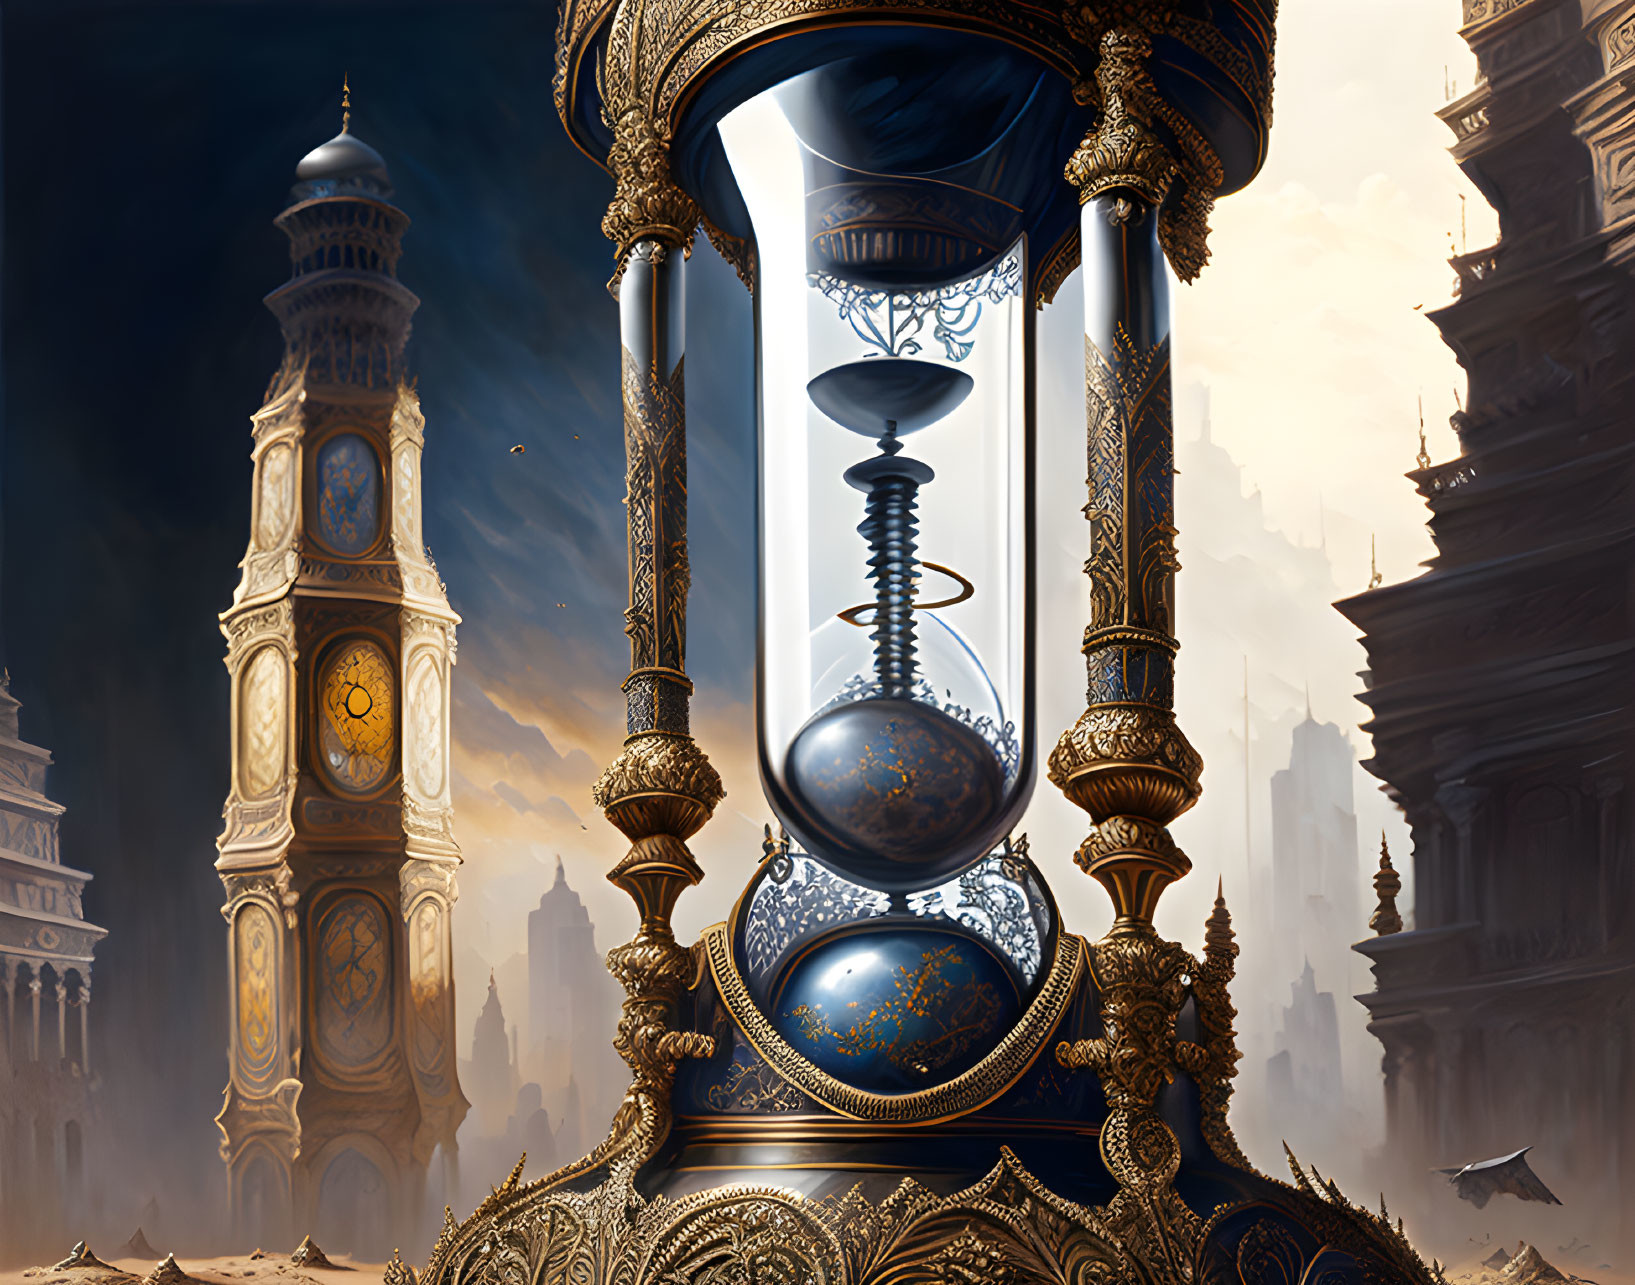 Ornate hourglass with cosmic sphere in mystical setting